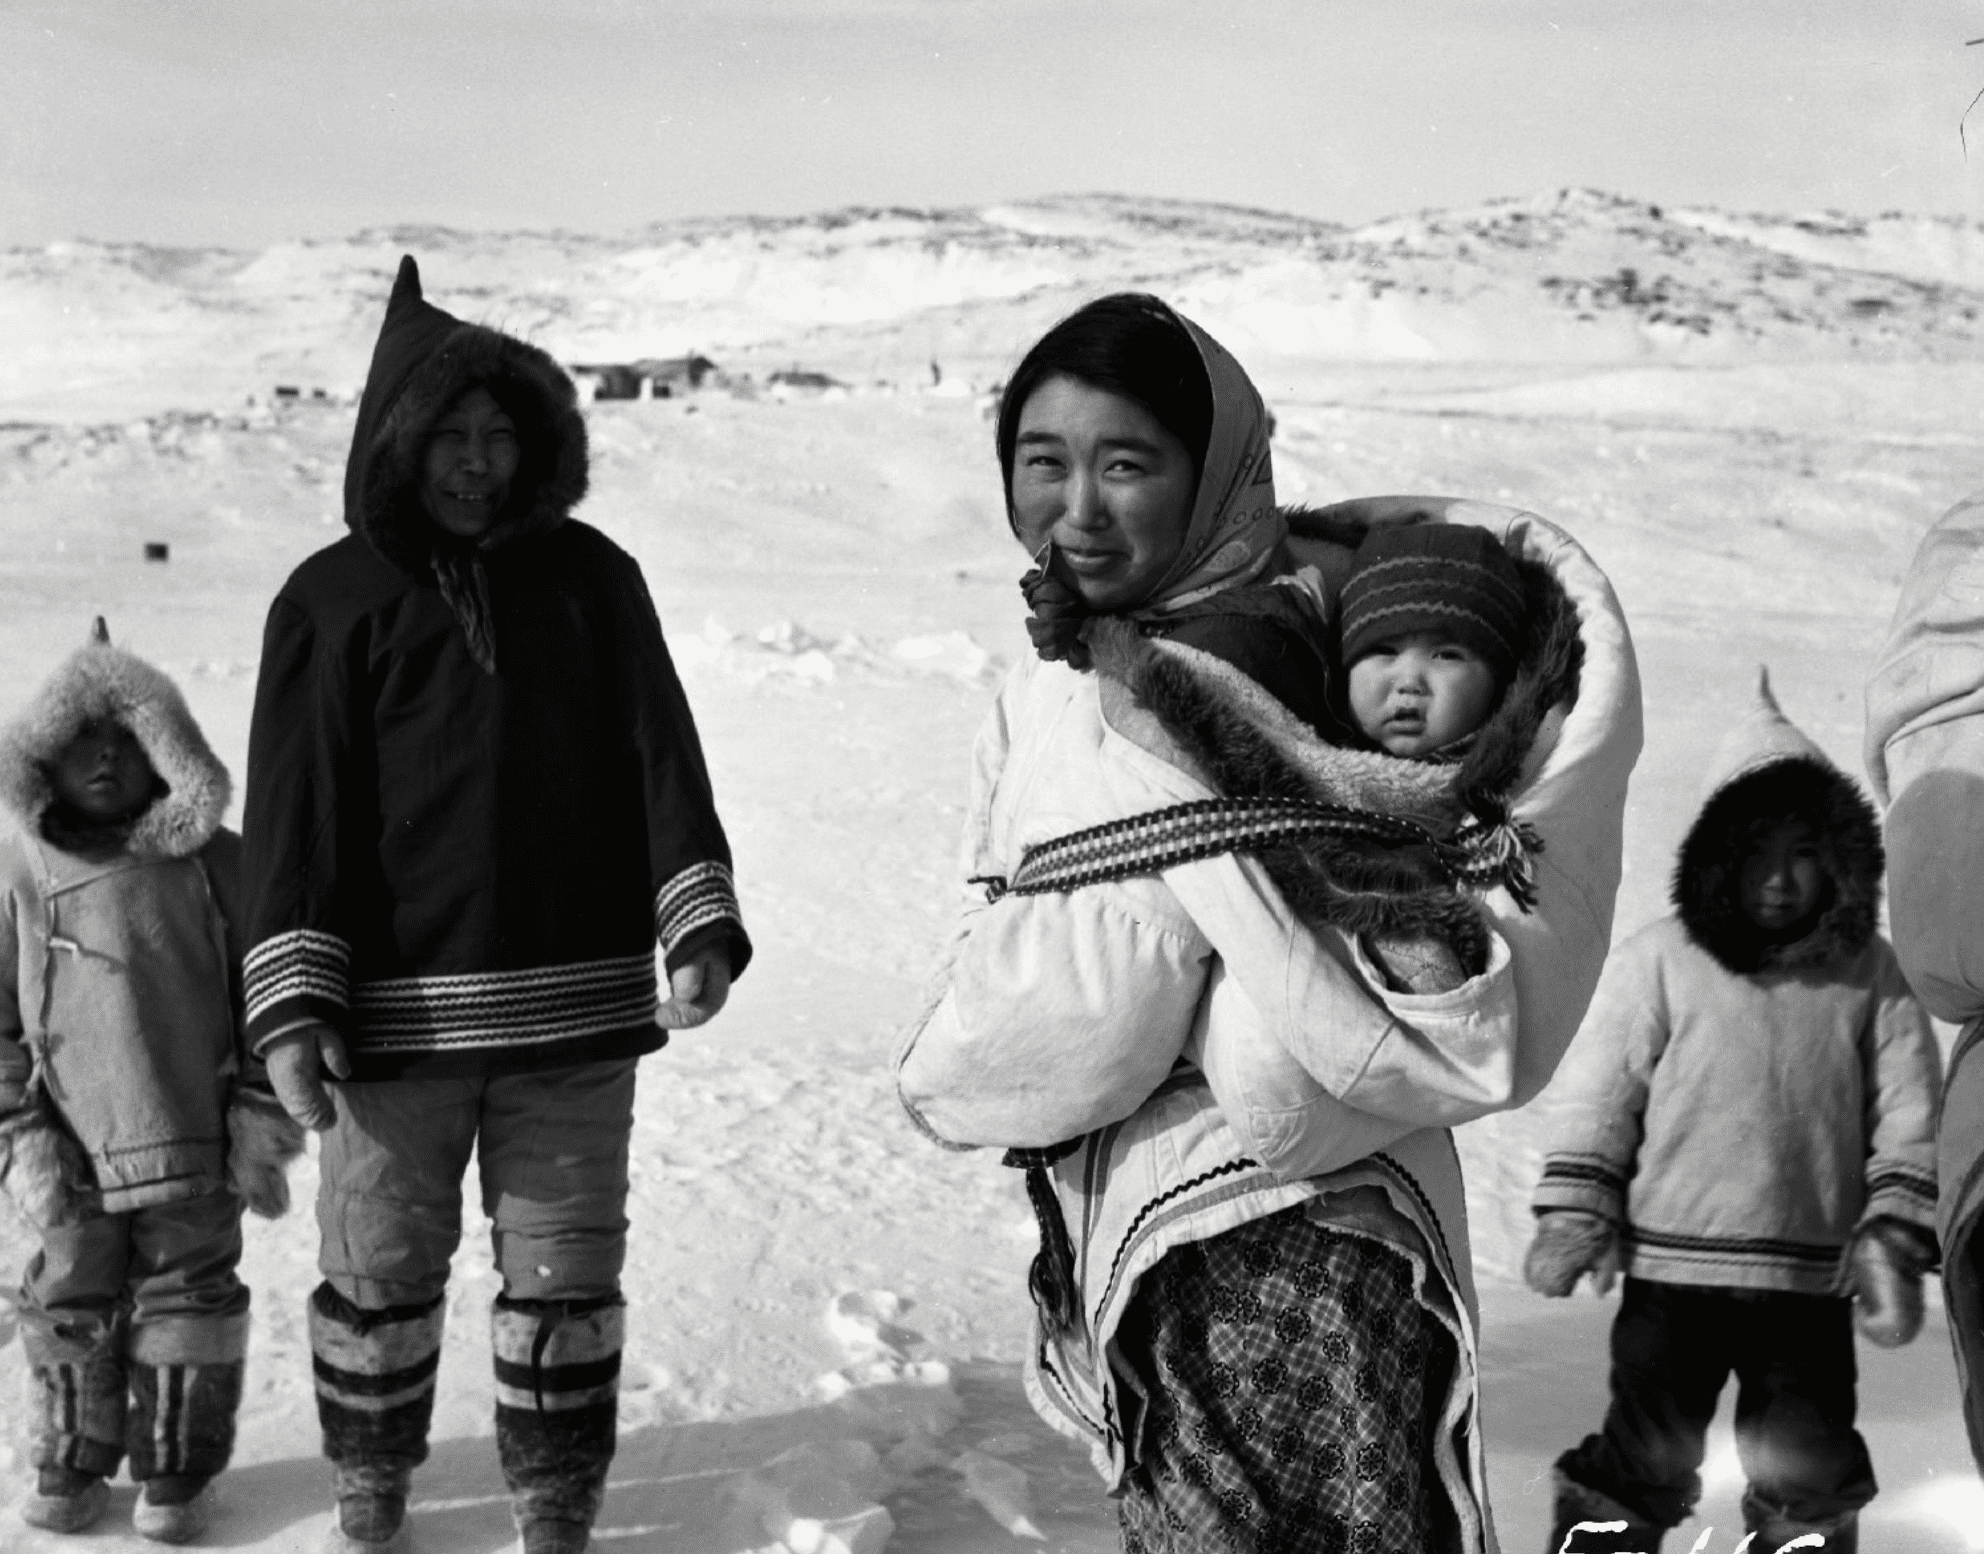 Series of photographs: daily life of the Inuit of Nouveau-Québec (now called Nord-du-Québec)